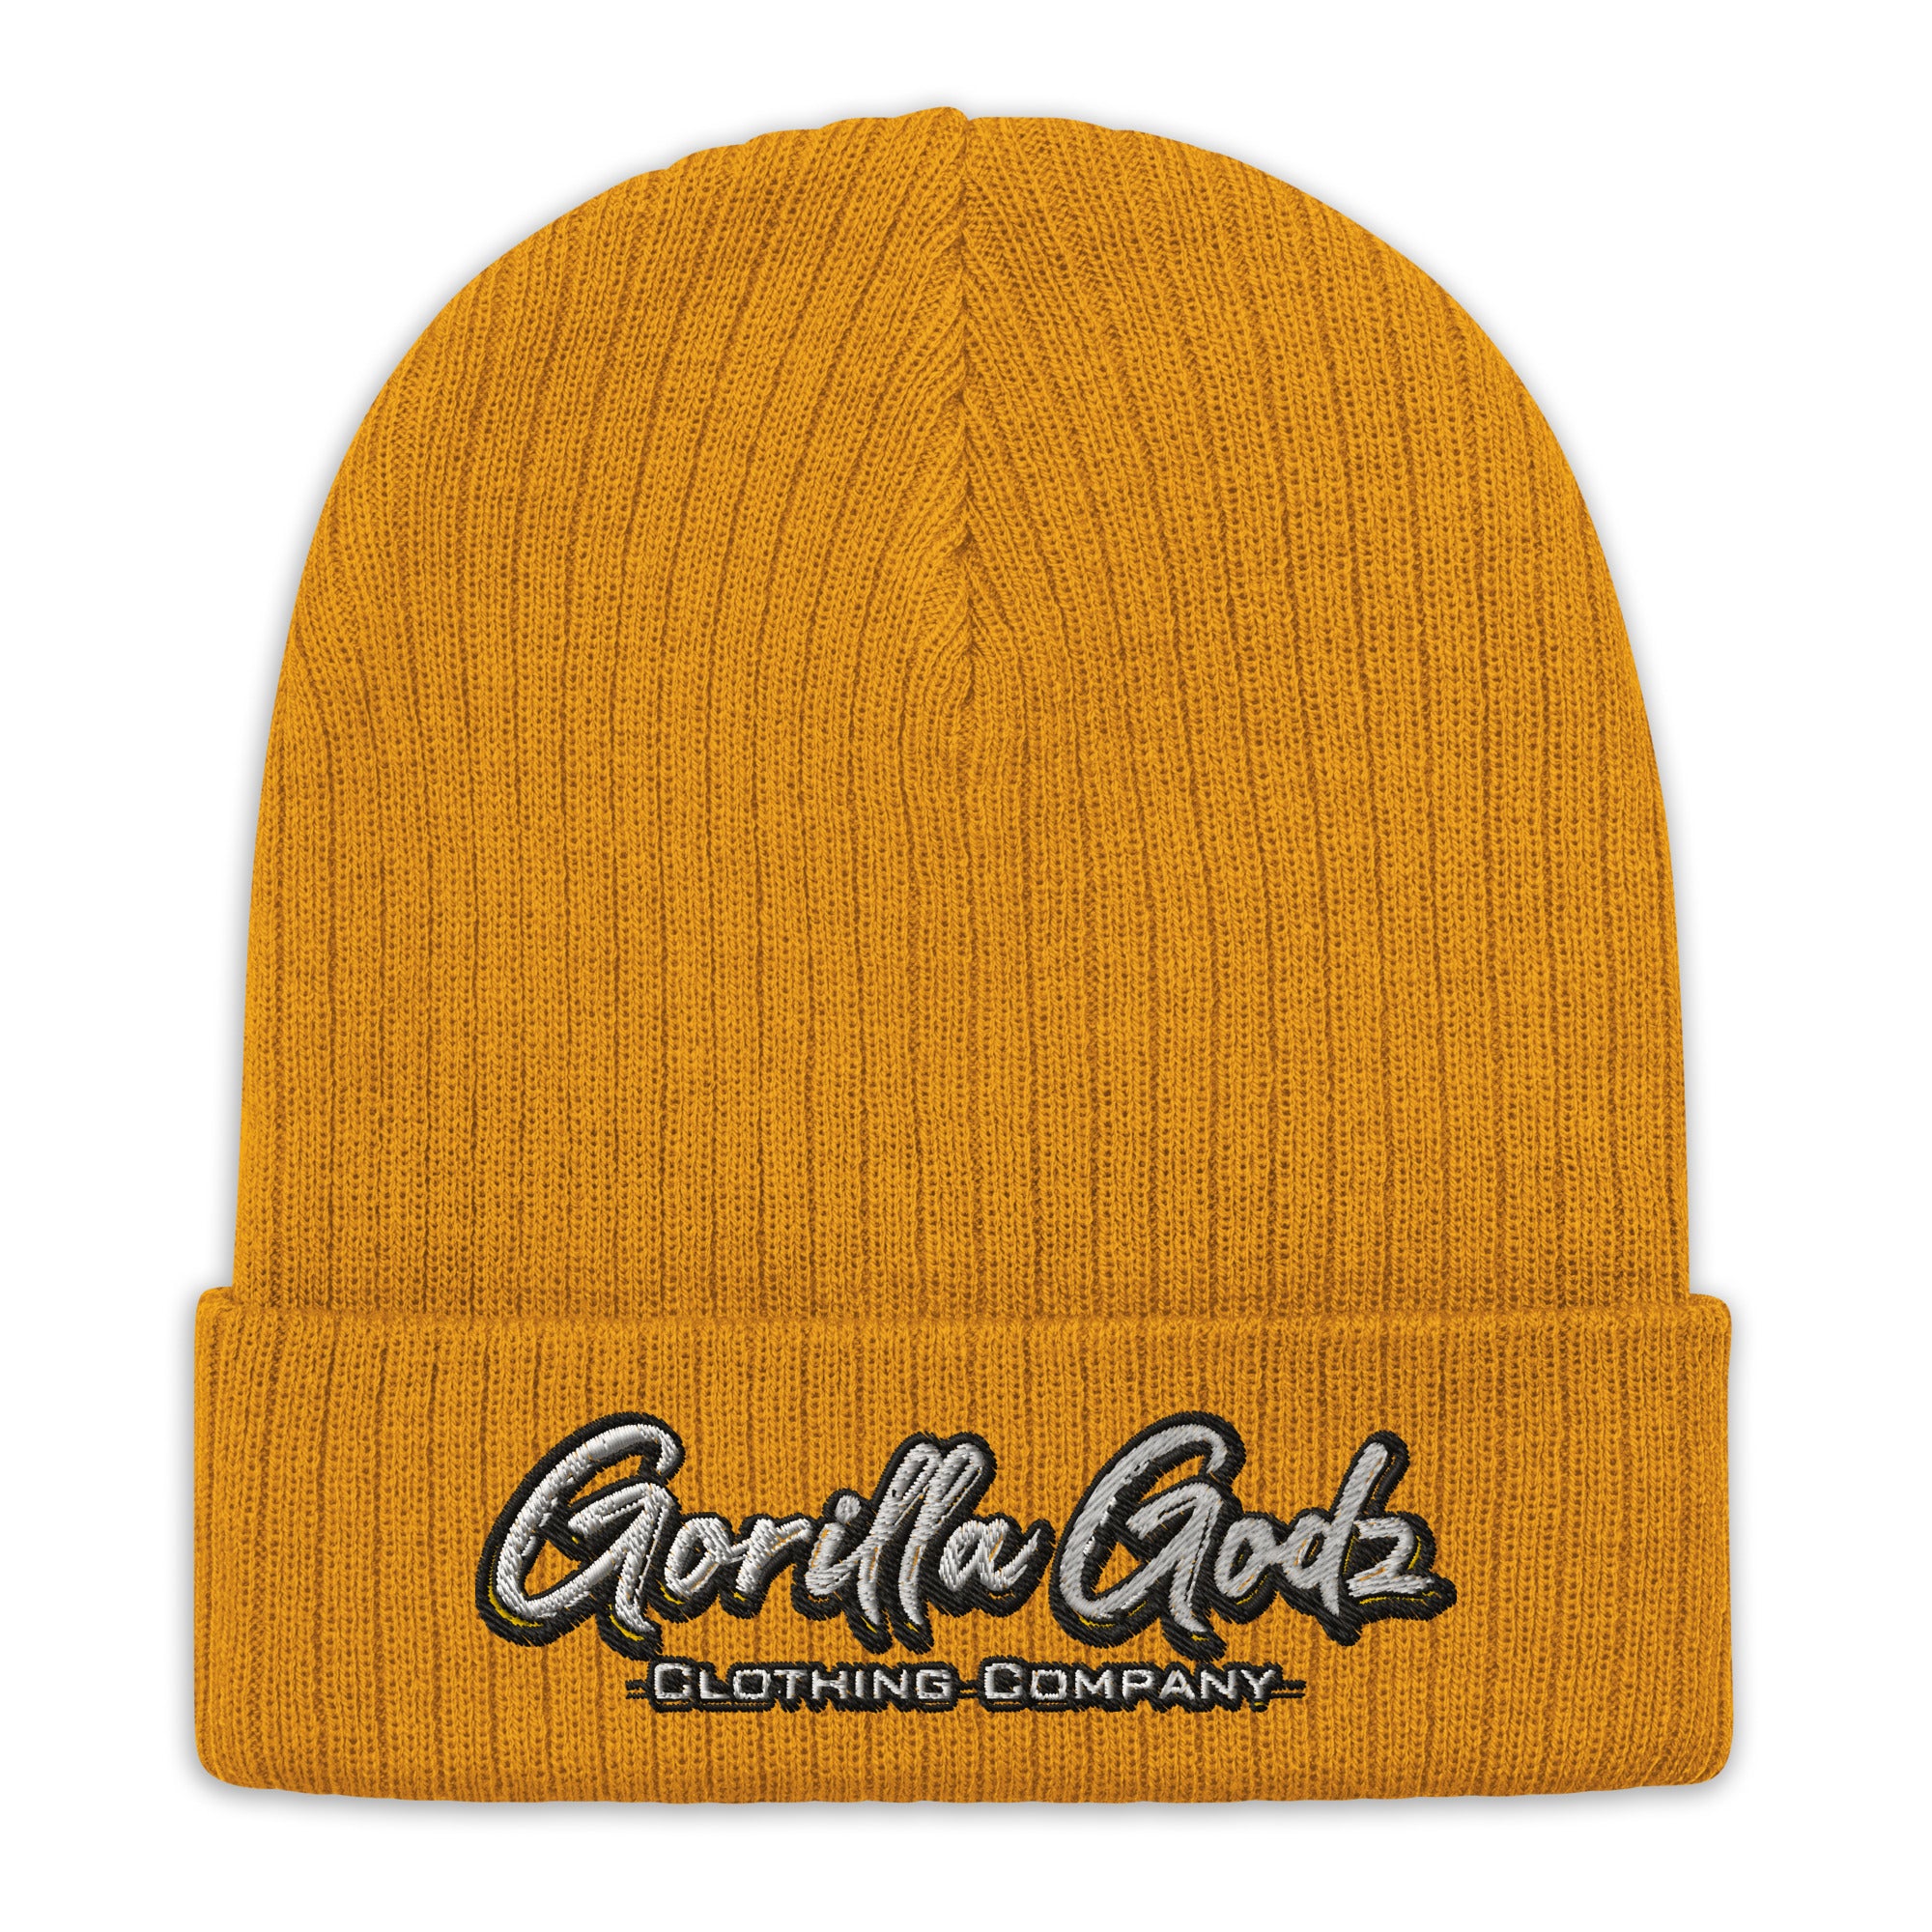 Gorilla Godz Ribbed knit beanie (Color options available)